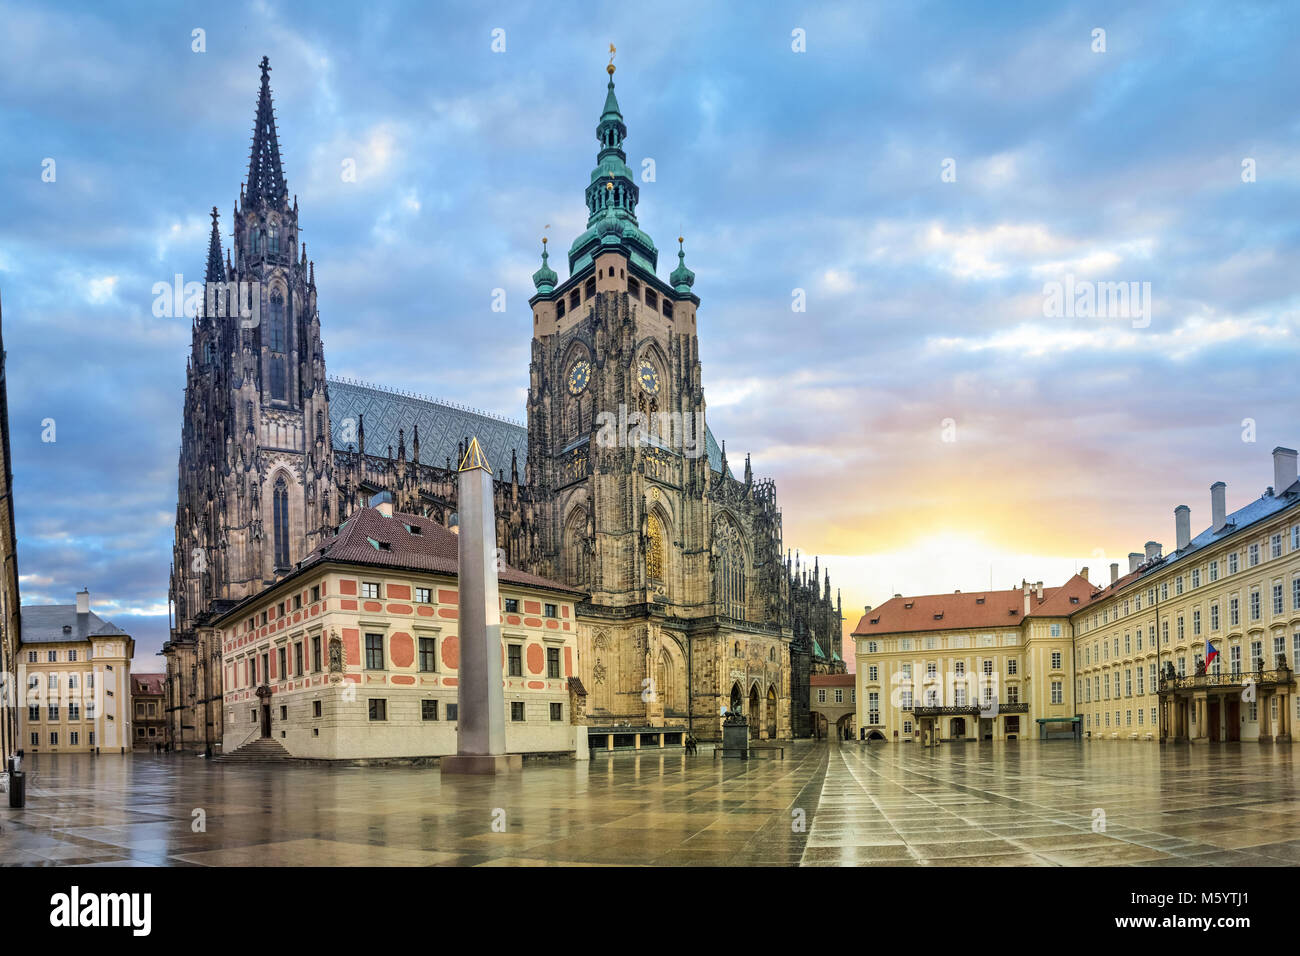 St. Vitus Cathedral in Prague Castle complex in Prague, Czech Republic (HDR image) Stock Photo